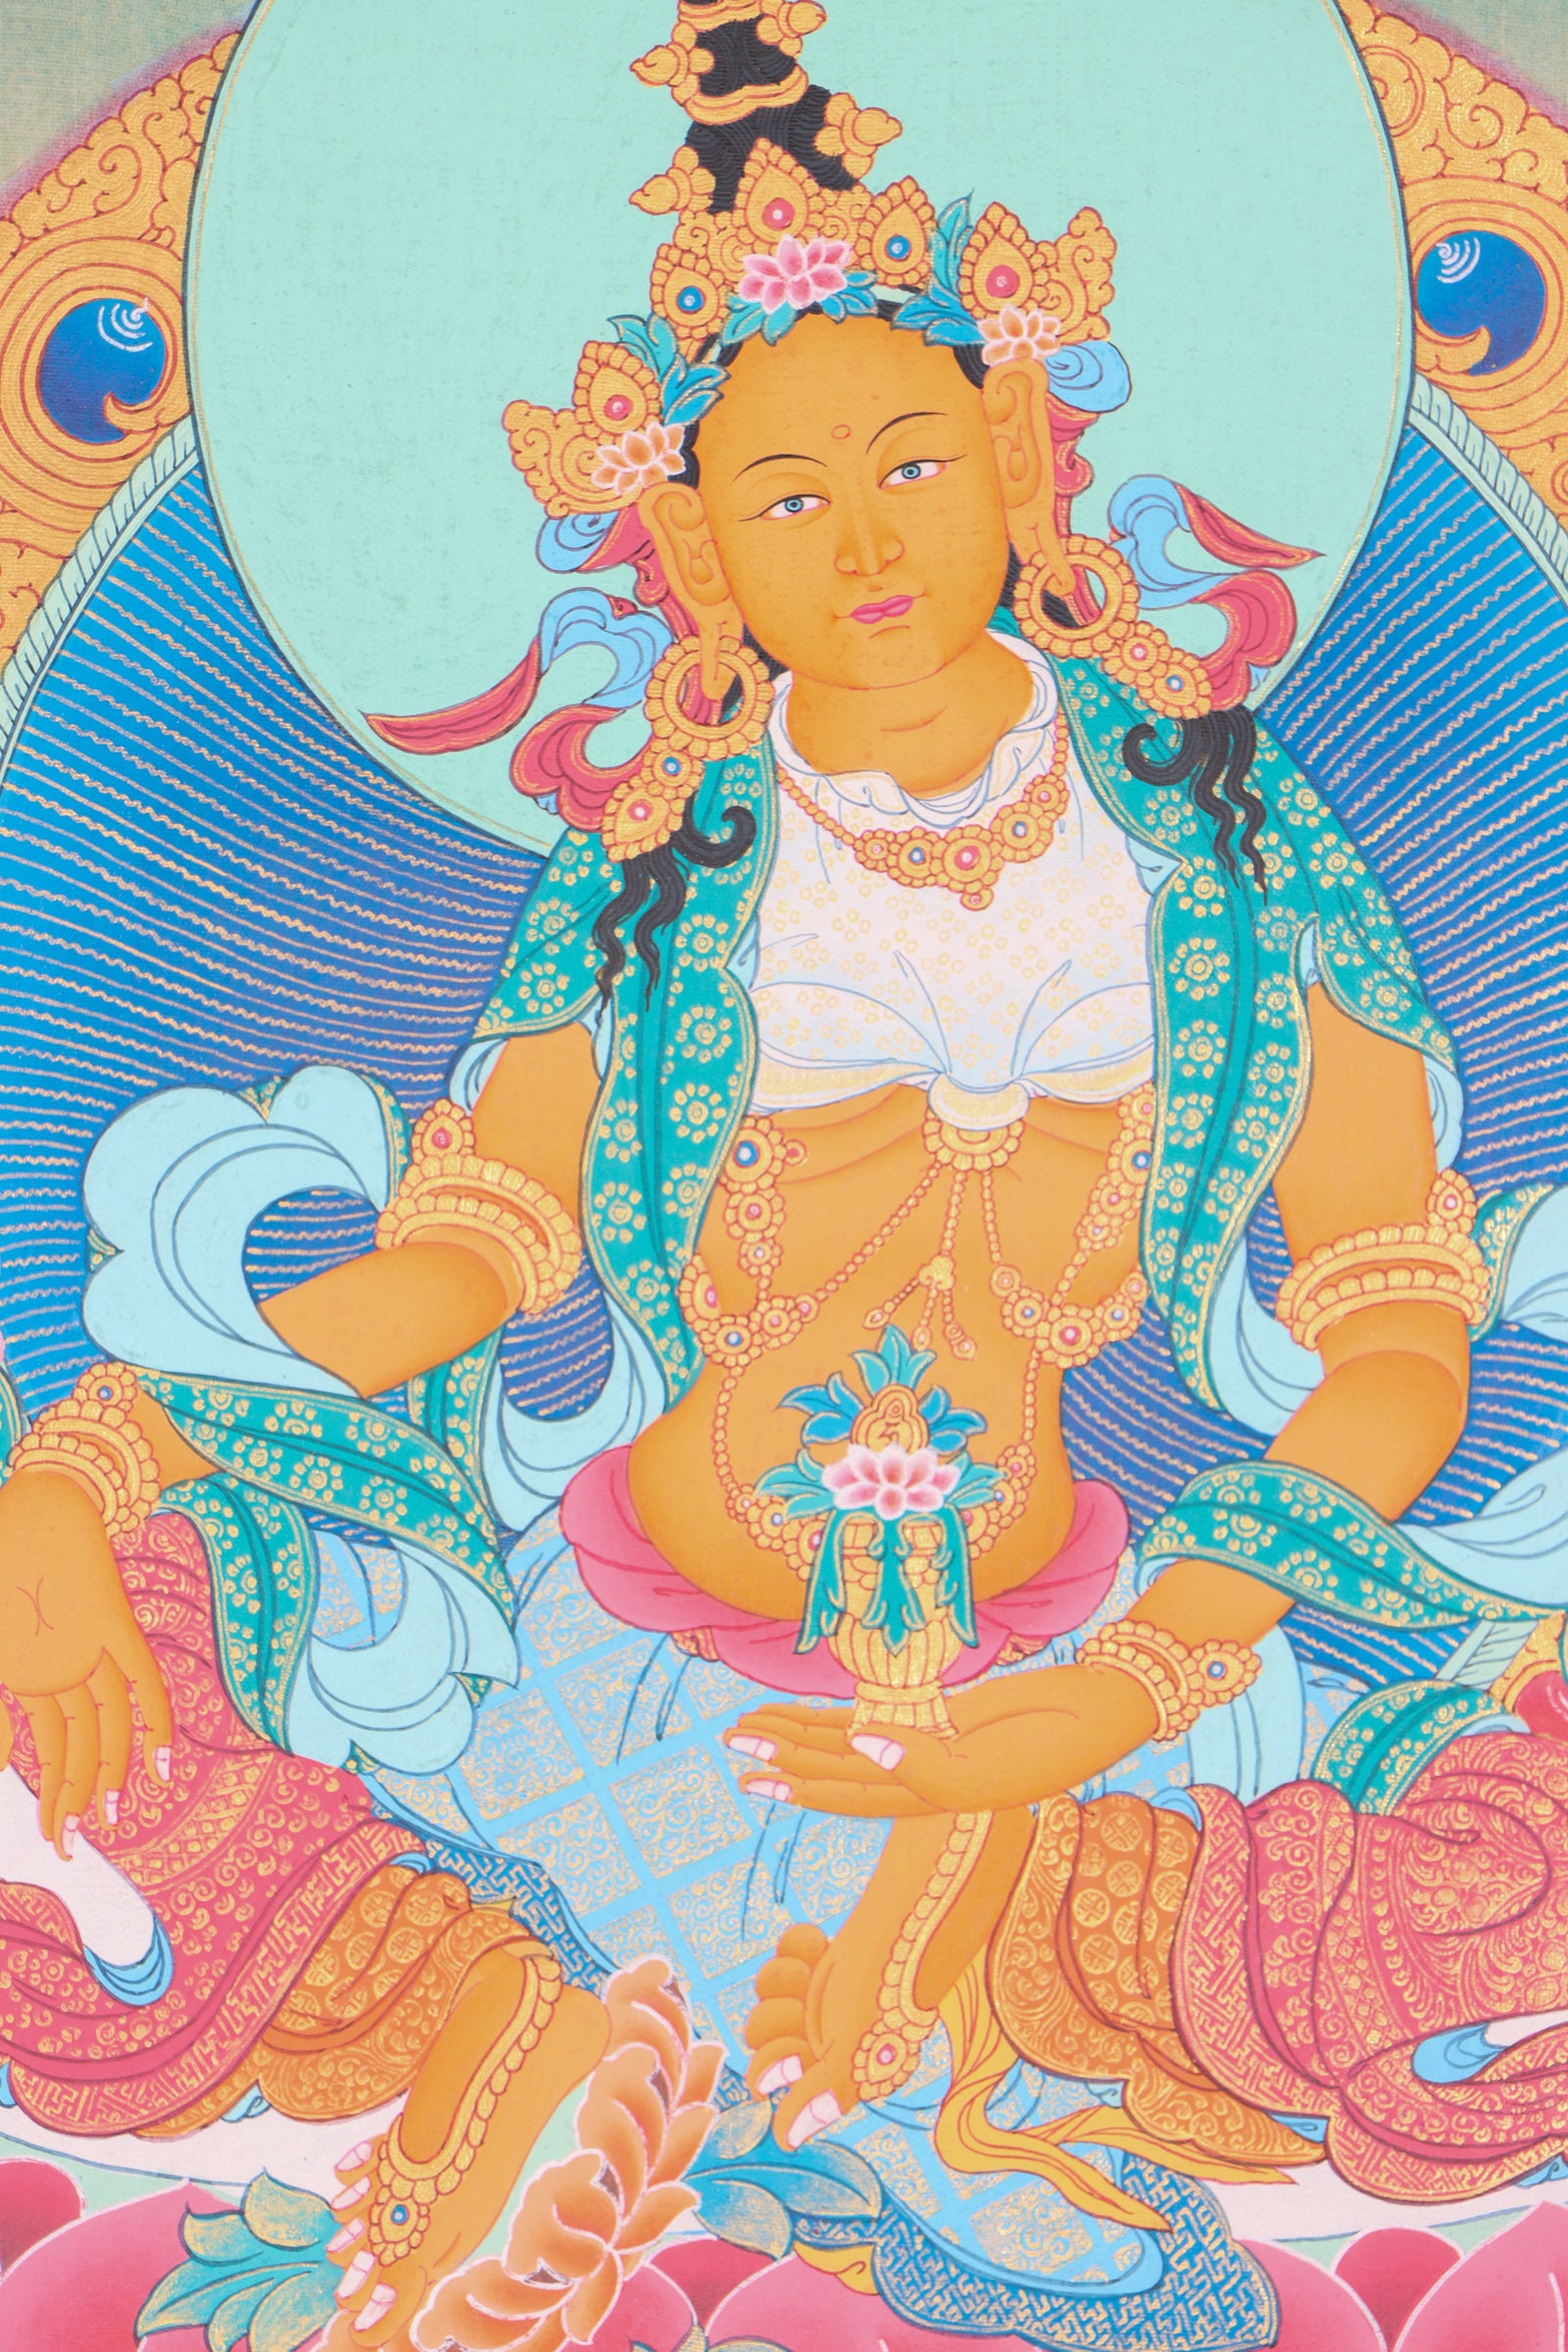 Yellow Tara Thangka Painting for Buddhist rituals, ceremonies and meditation practices